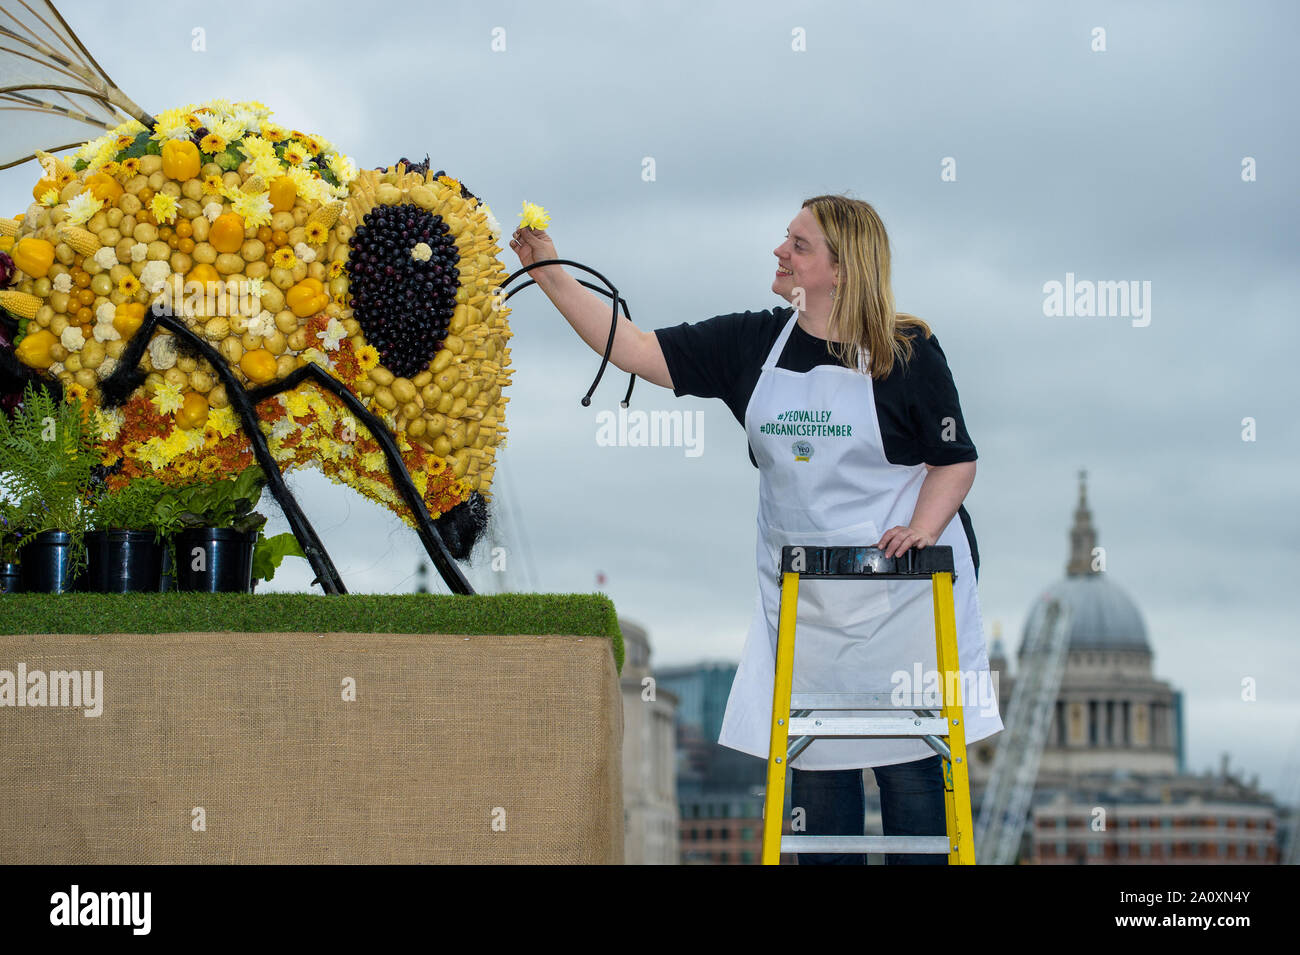 EDITORIAL USE ONLY Food artist Prudence Staite and an edible Bee sculpture, created by Yeo Valley to celebrate Organic September and International Organic Day in Southbank, London. Stock Photo